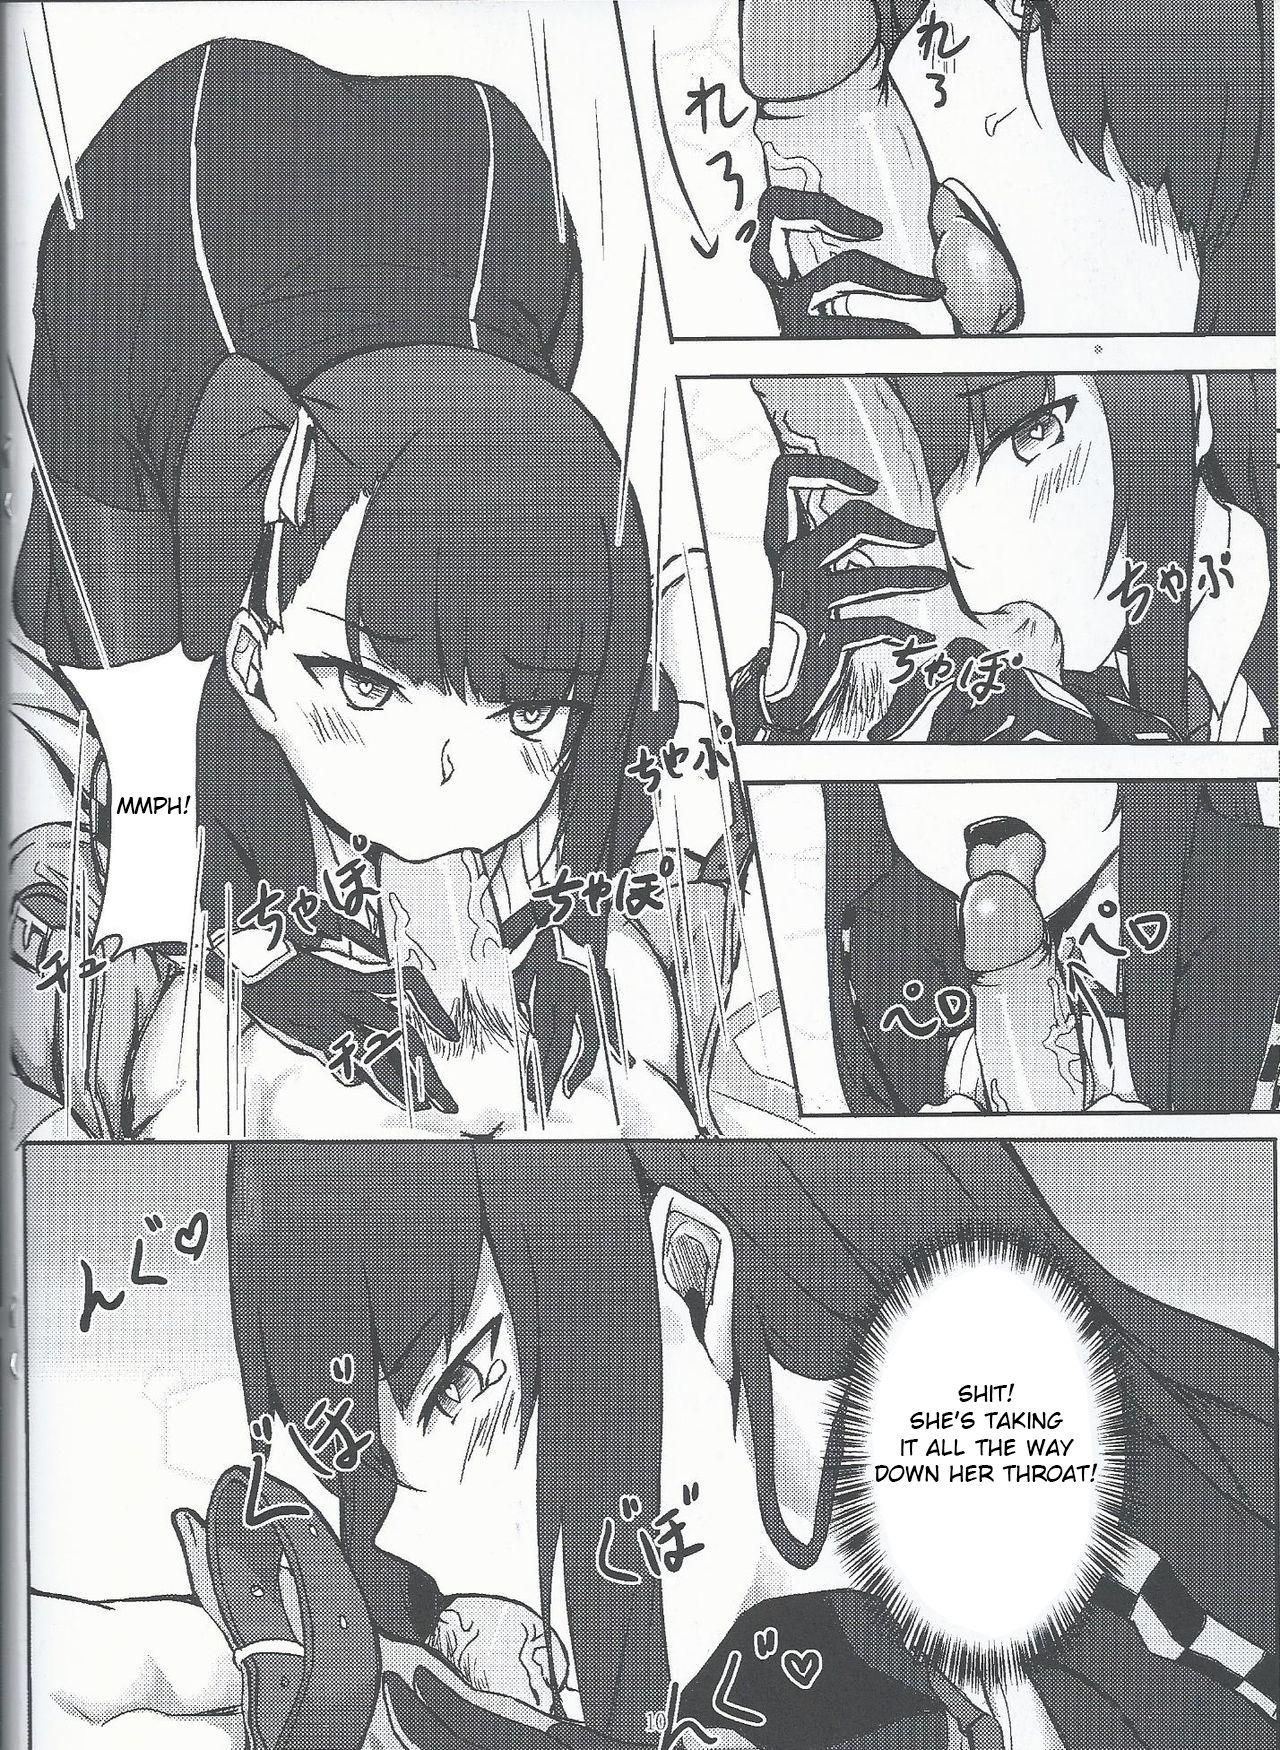 I don't know what to title this book, but anyway it's about WA2000 8